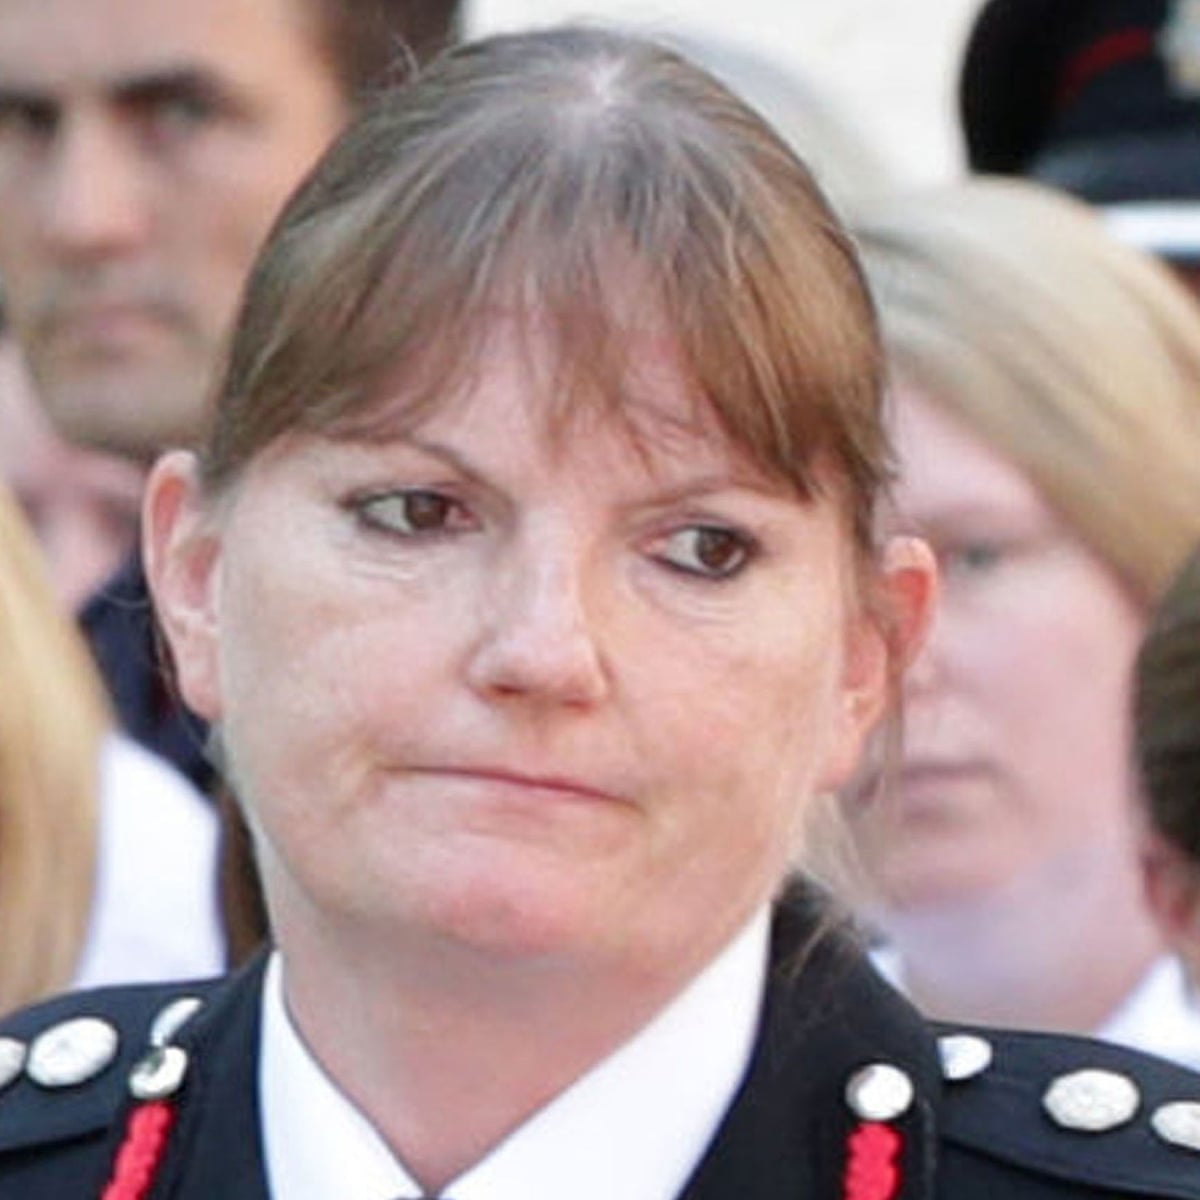 London fire chief Dany Cotton resigns after Grenfell criticism ...